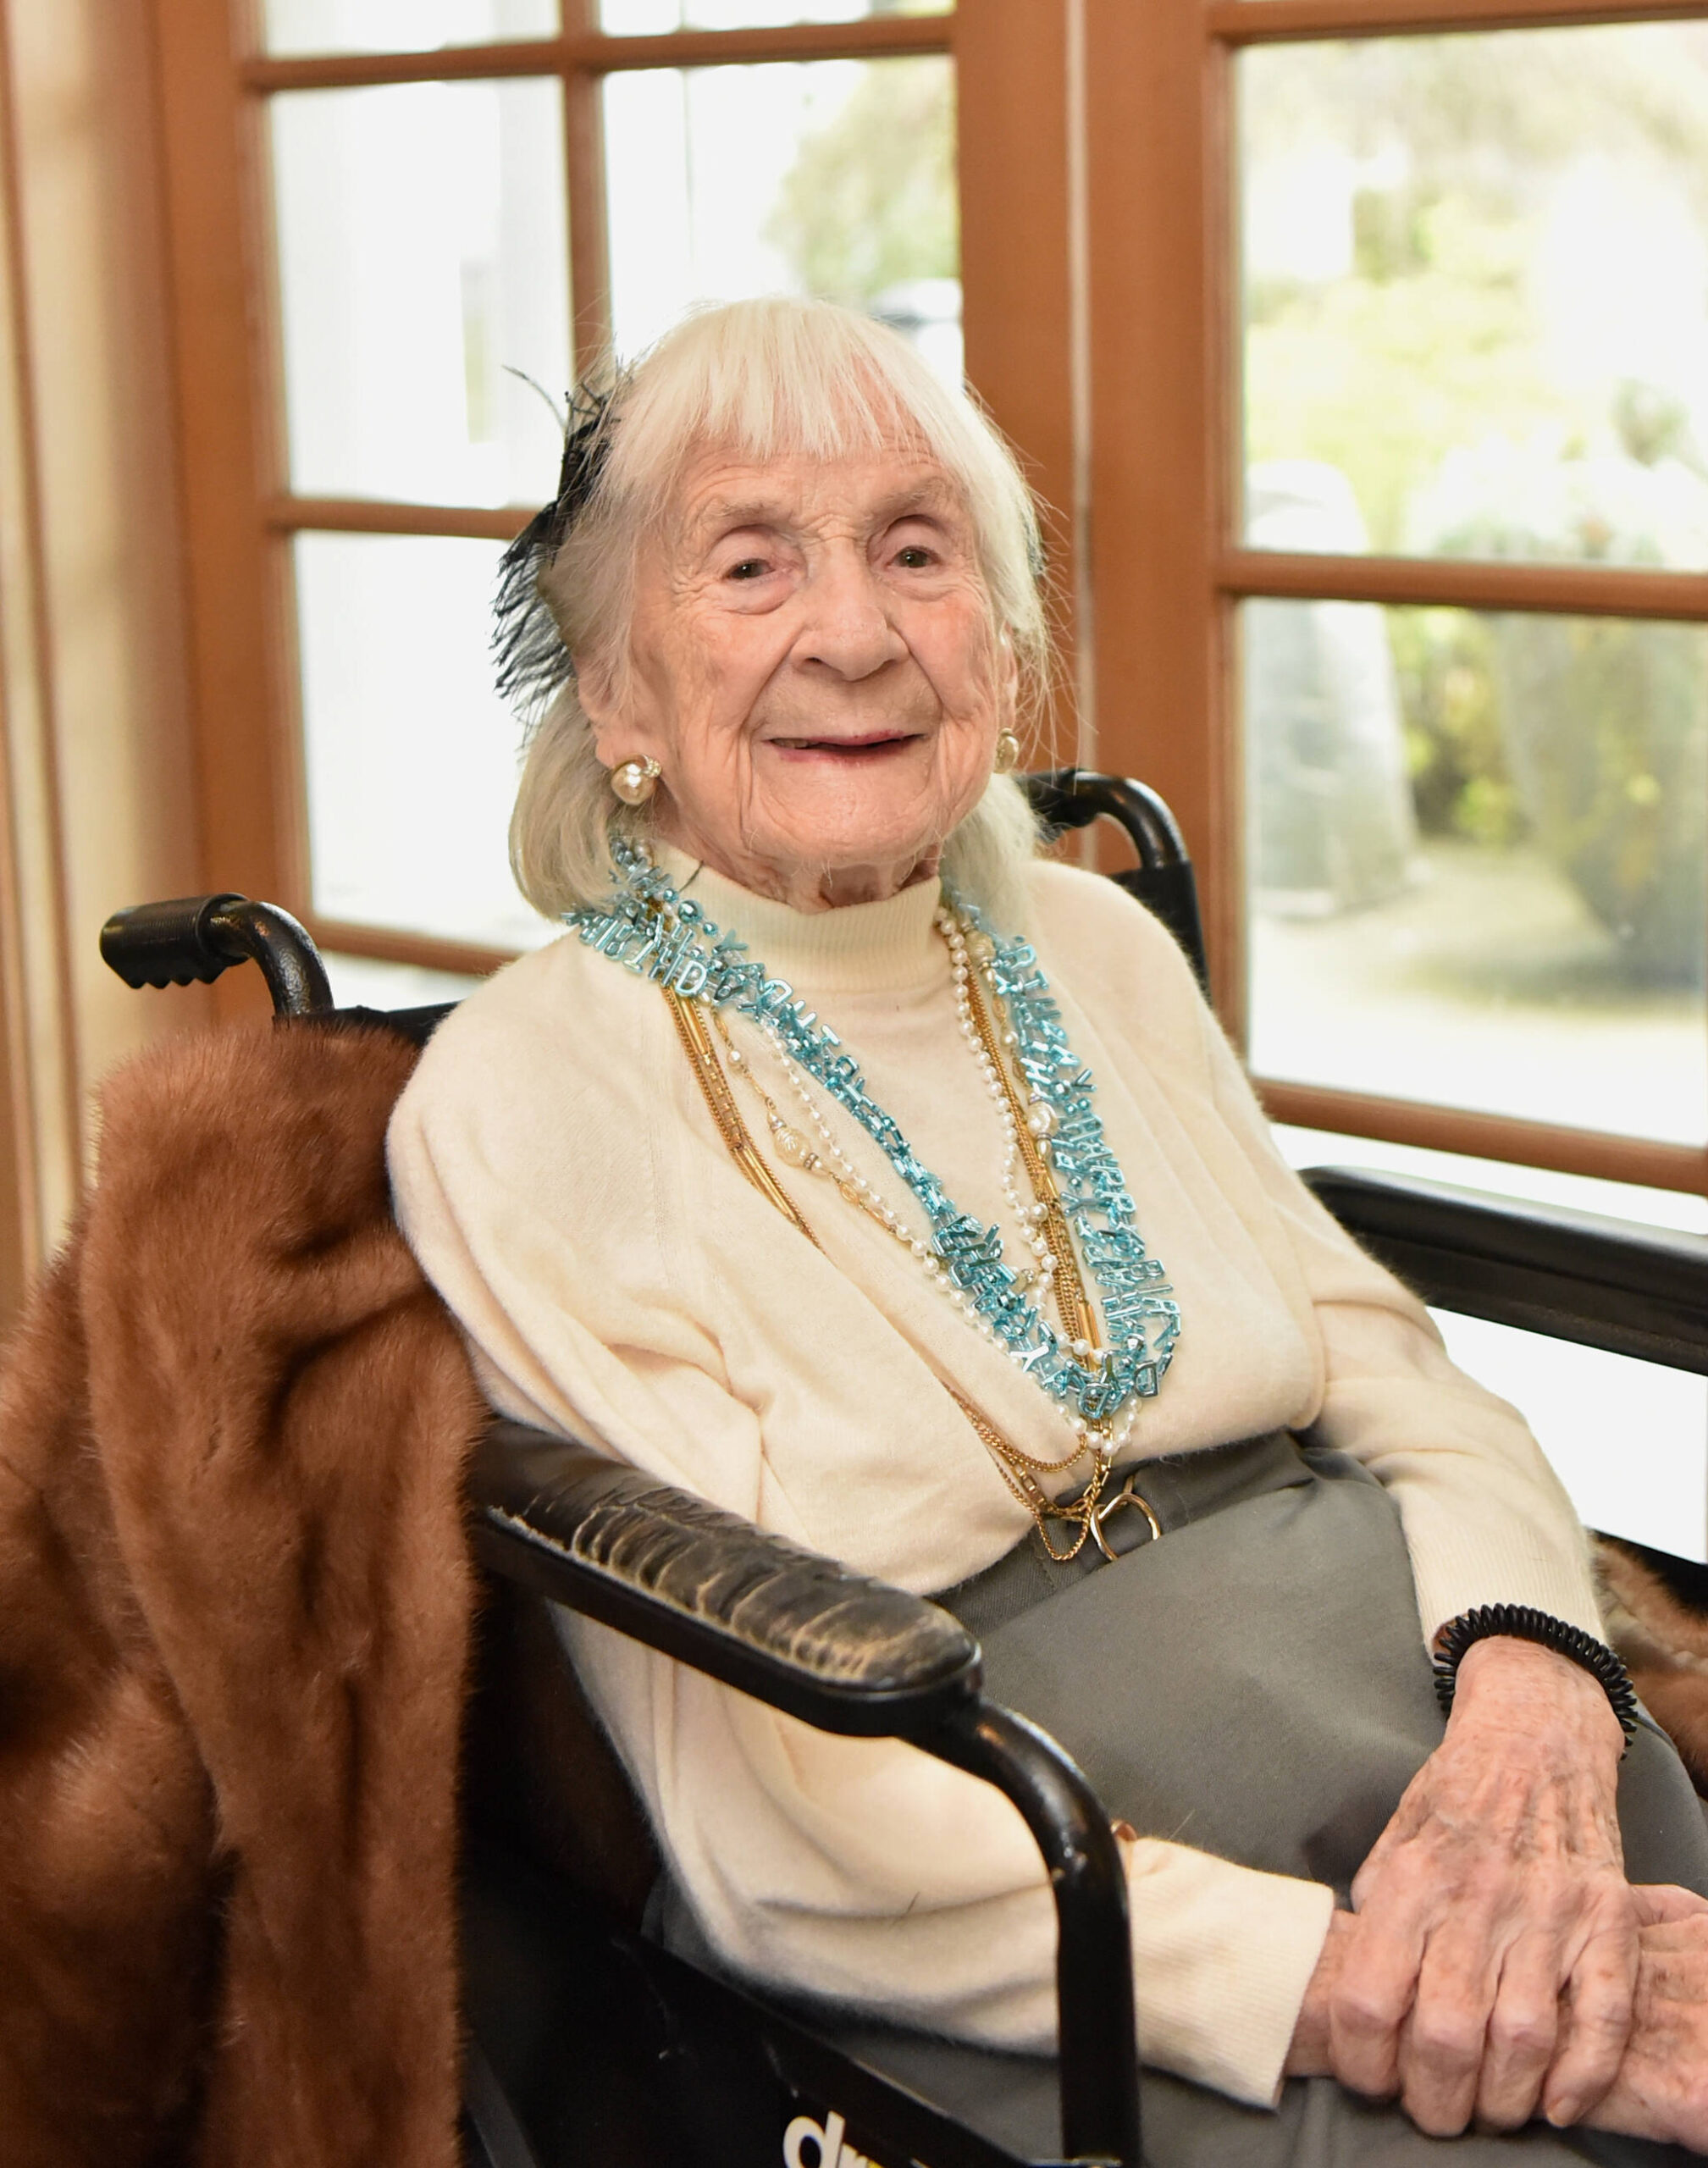 Wohlsen poses for a portrait to mark her 107th birthday.